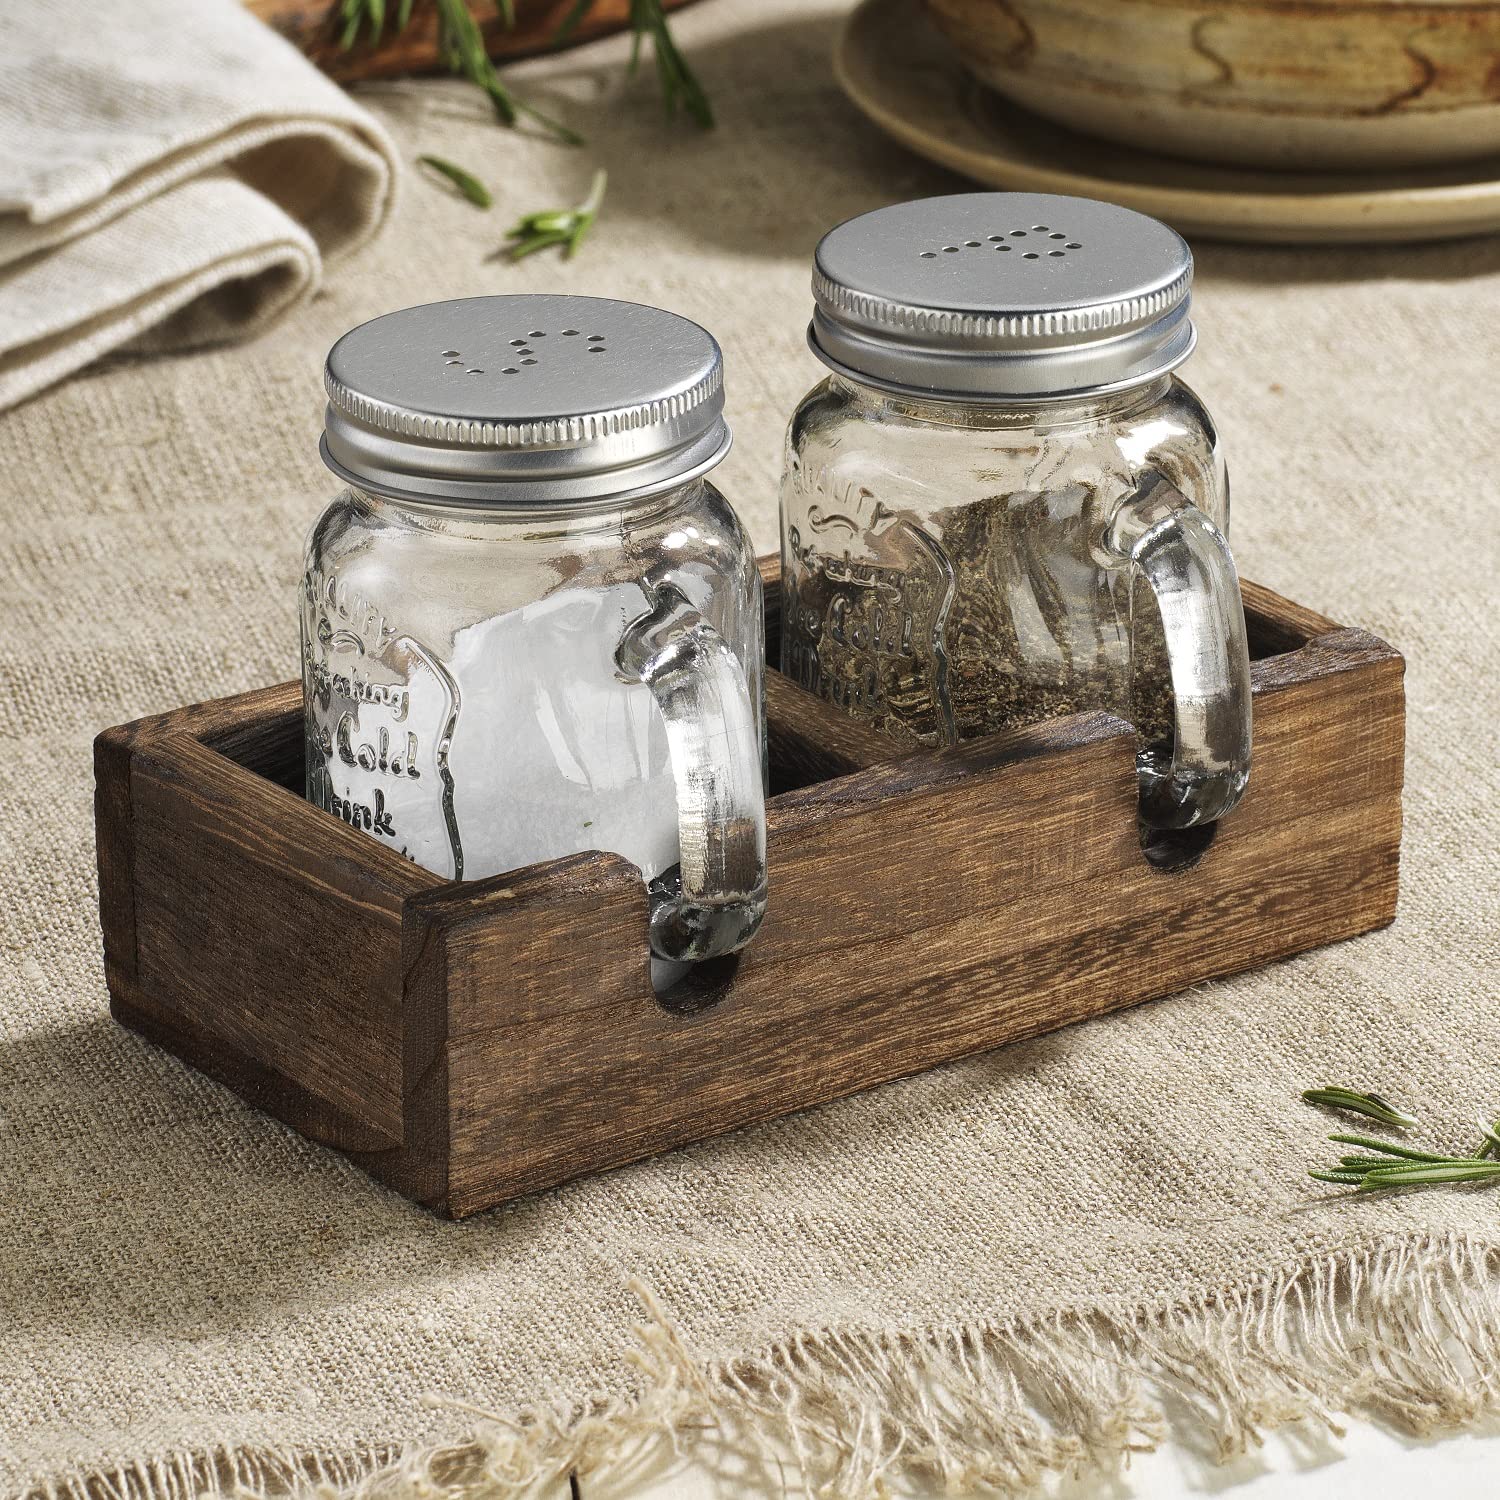 MosJos Mason Jar Salt and Pepper Shakers - Vintage Glass Condiment Dispenser Set with Wooden Holder Caddy - Farmhouse Kitchen Decor, Easy Refill 5-ounce Capacity with Stainless Steel Lids  - Like New